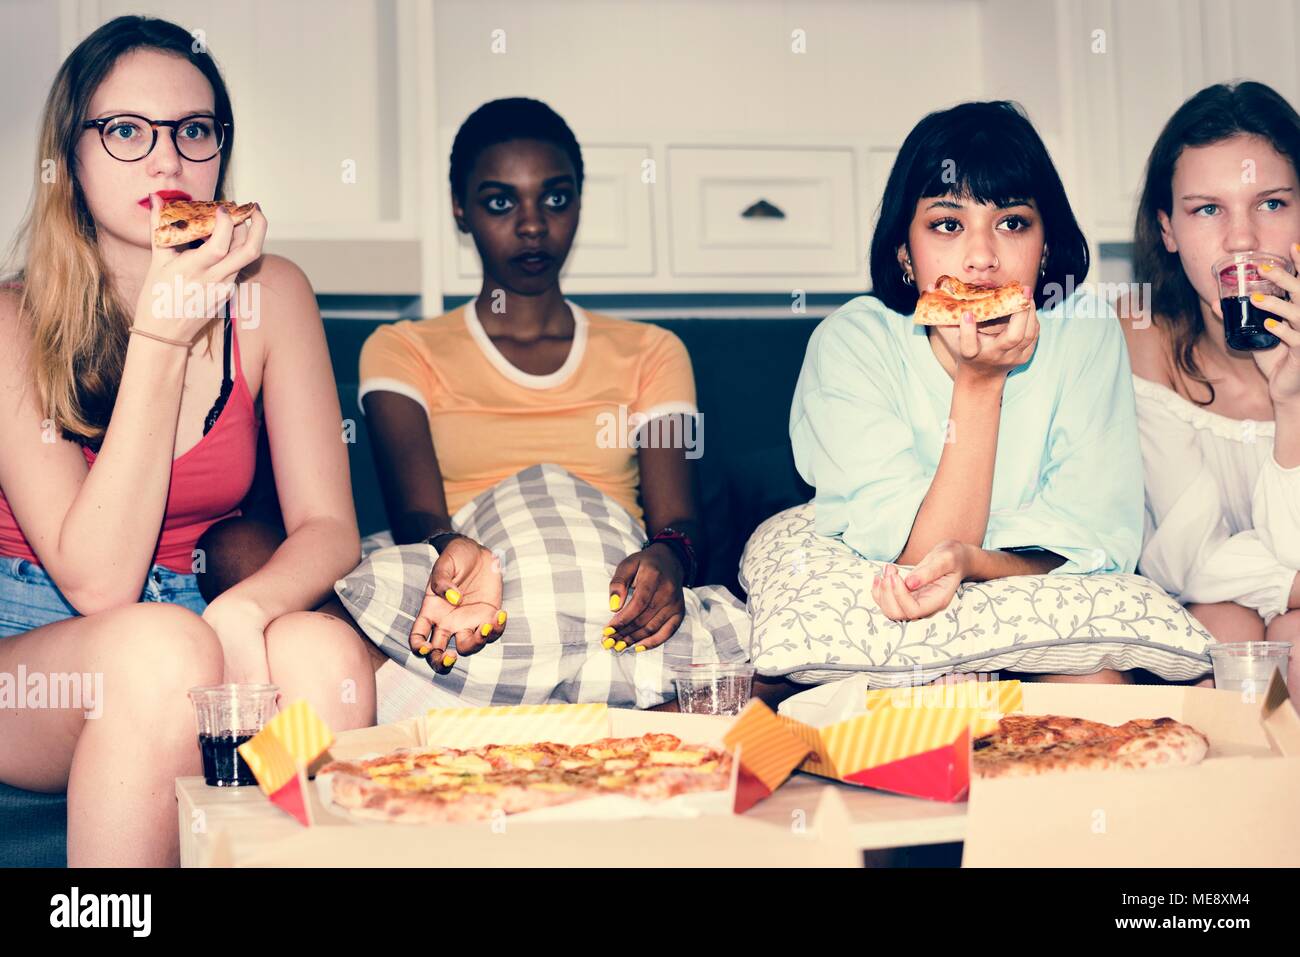 A diverse group of women sitting on the couch and eating pizza together Stock Photo